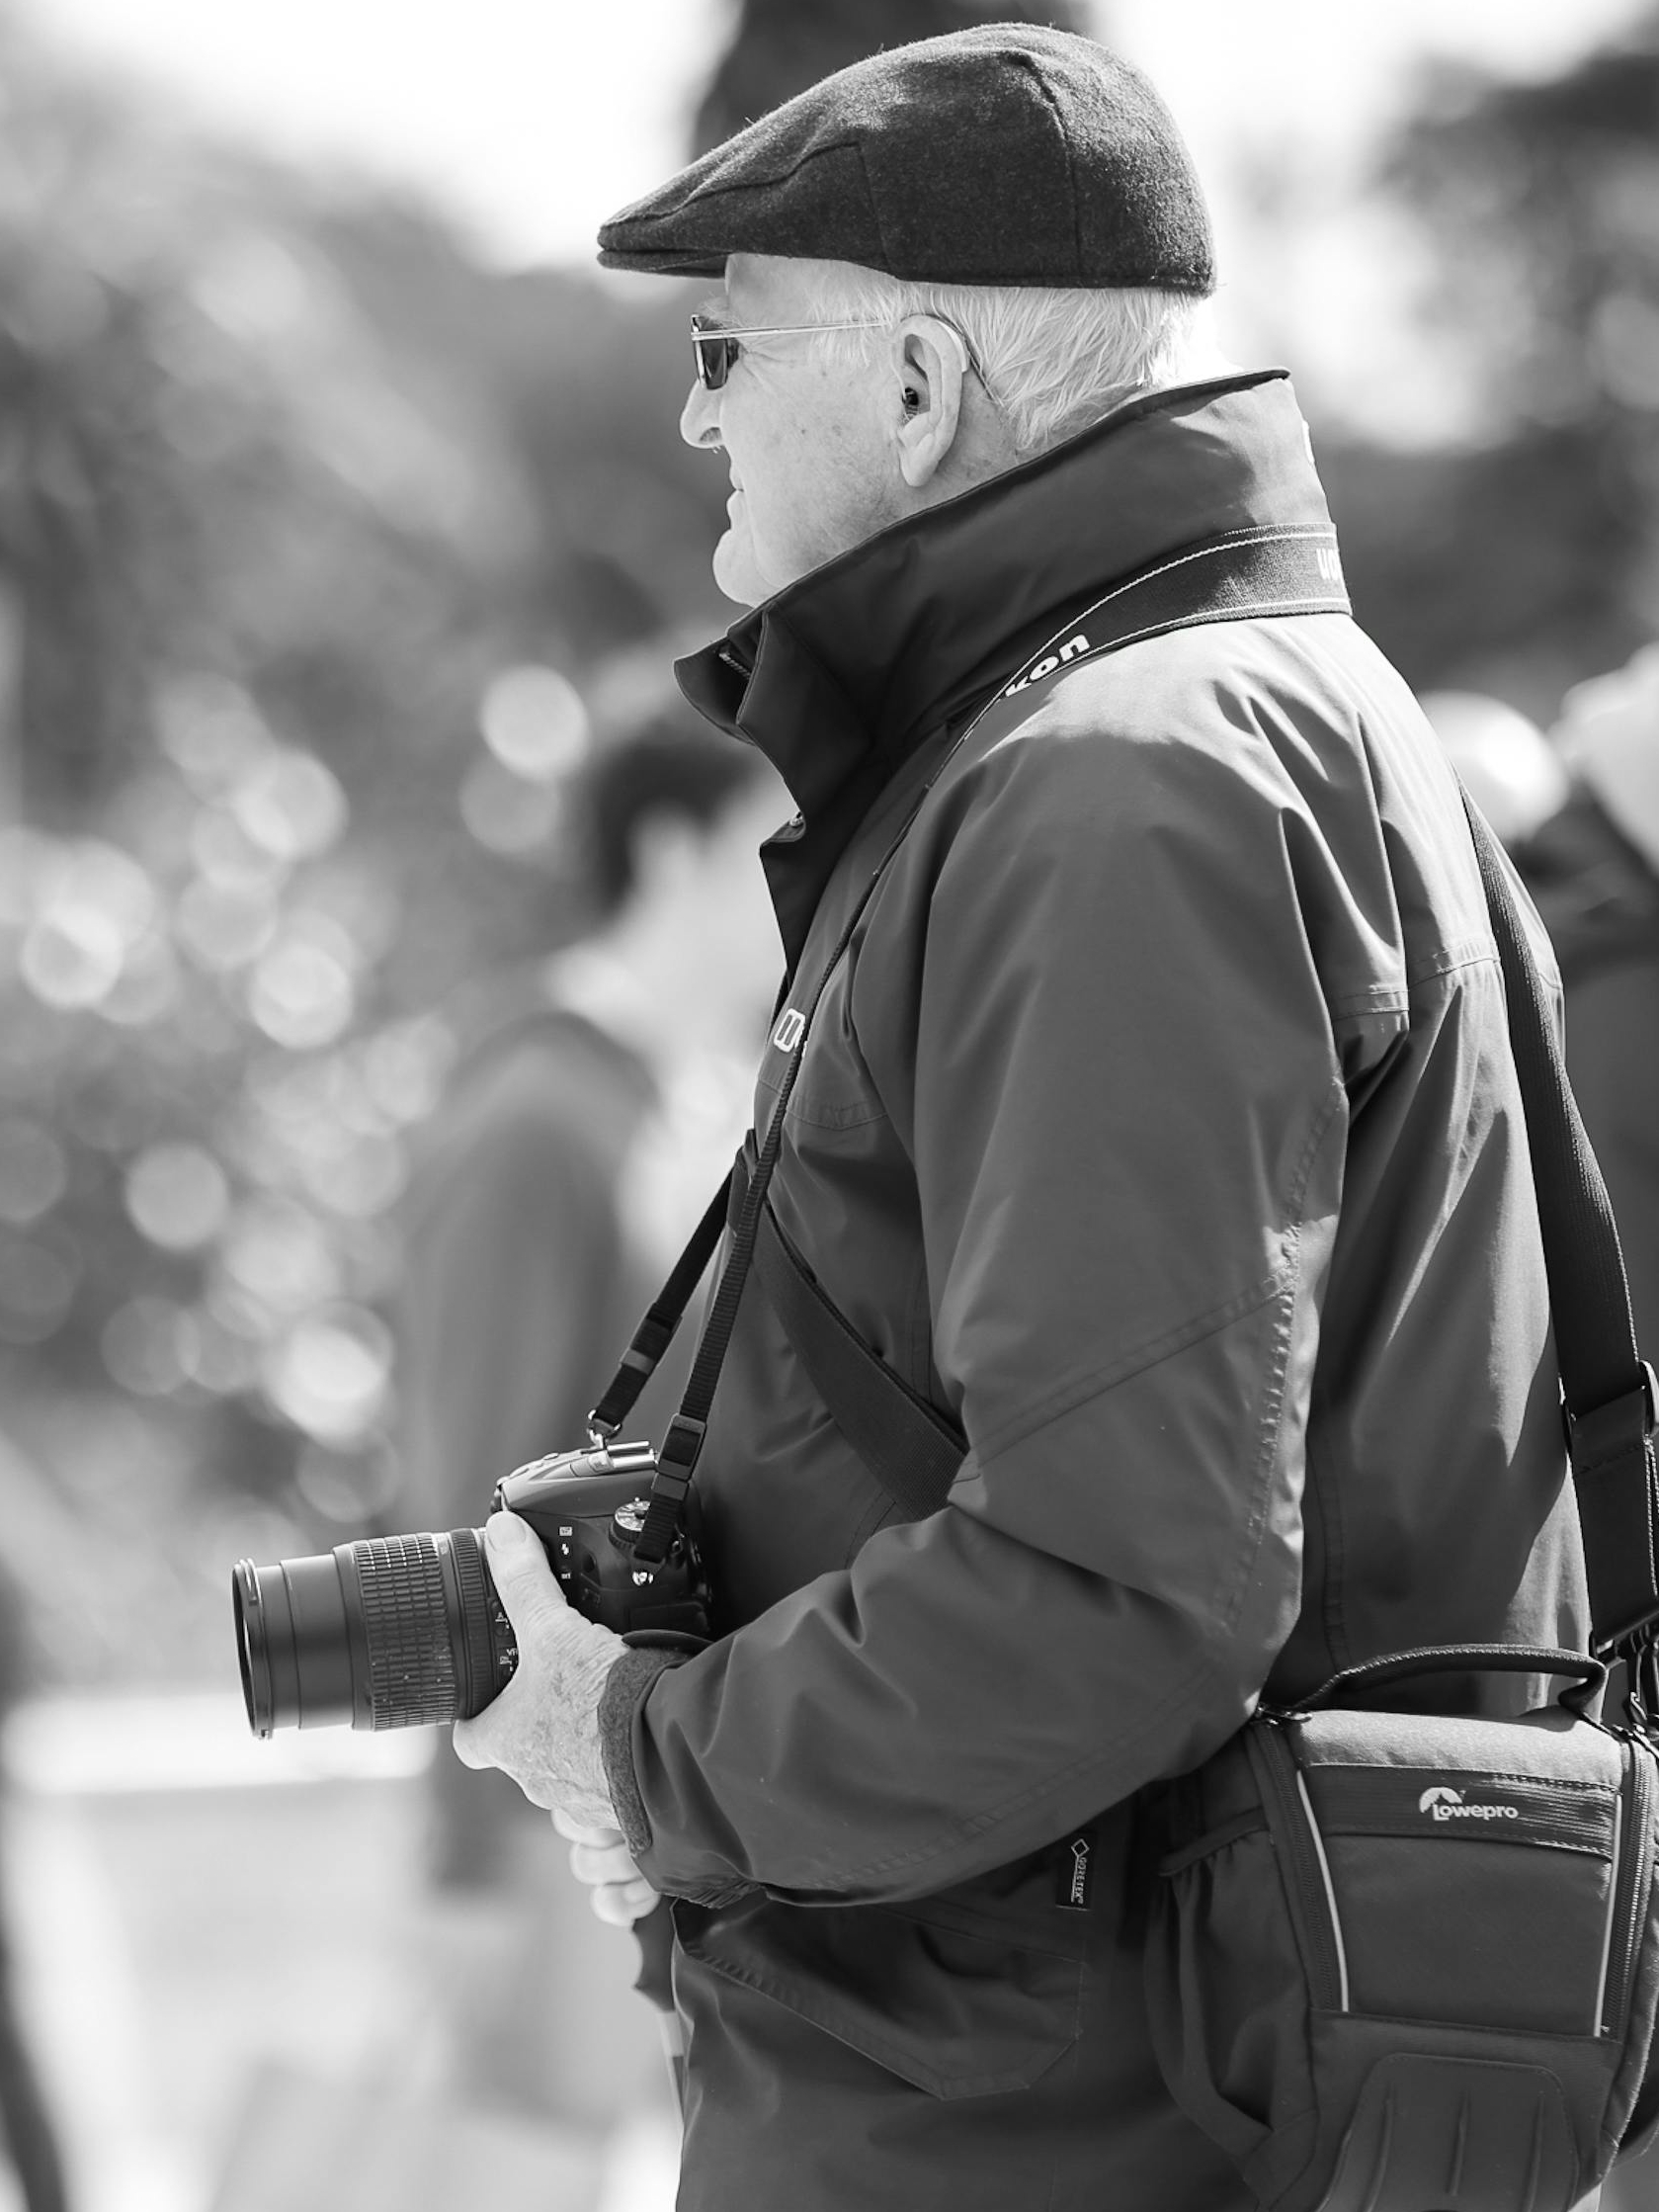 Harold indulging his passion for photography | Source: Pexels